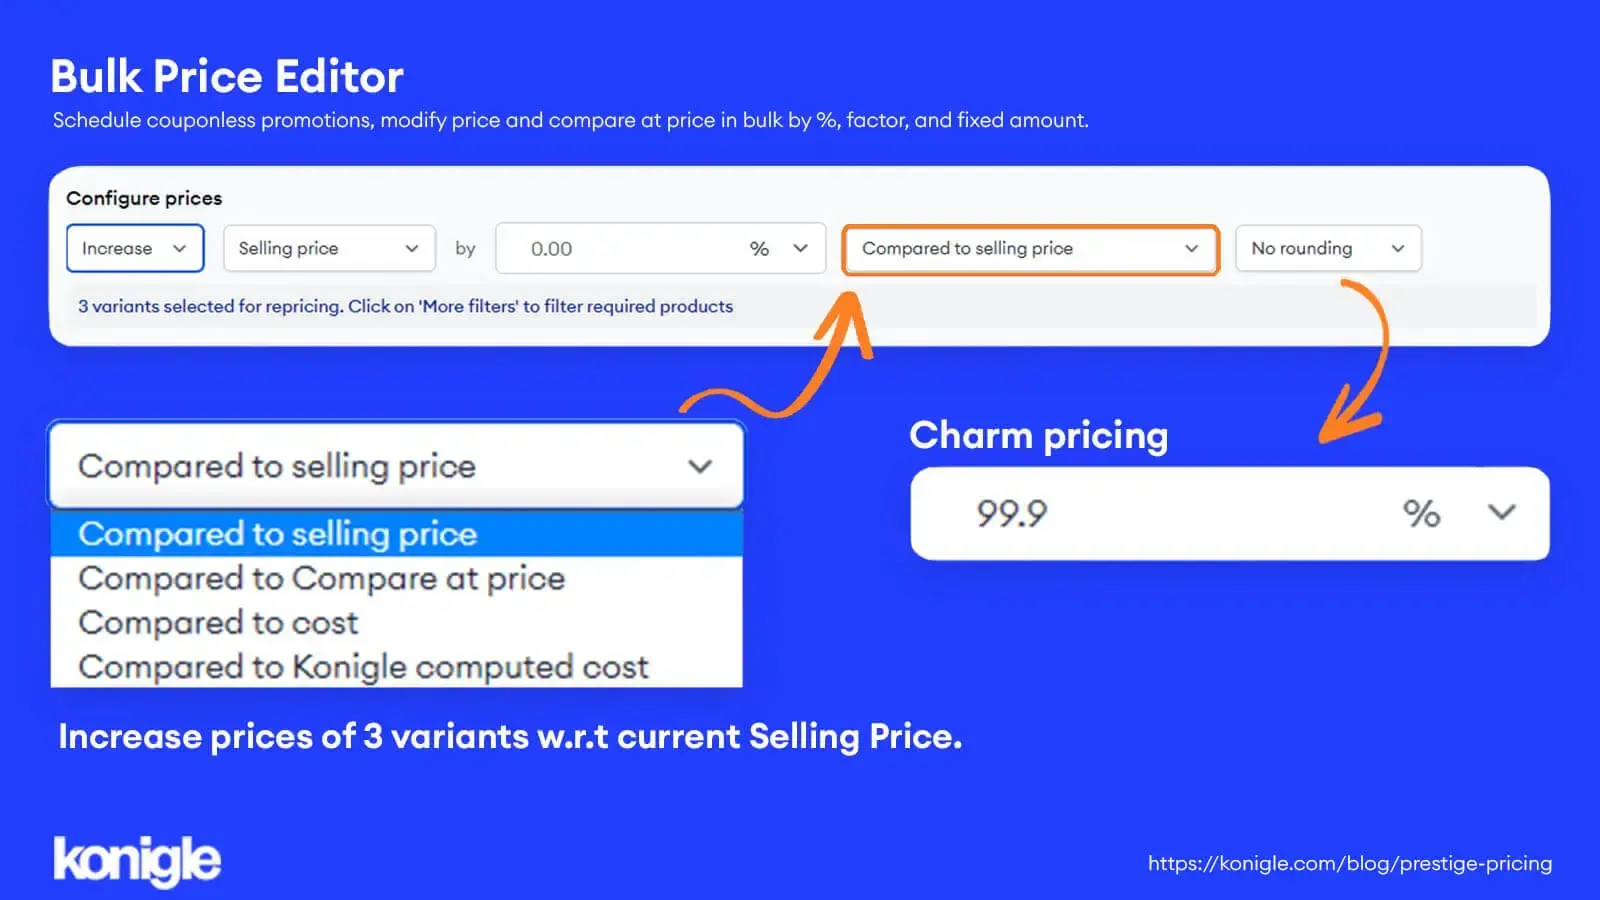 Choose 'Increase' and set your preferred selling price to configure your prices.